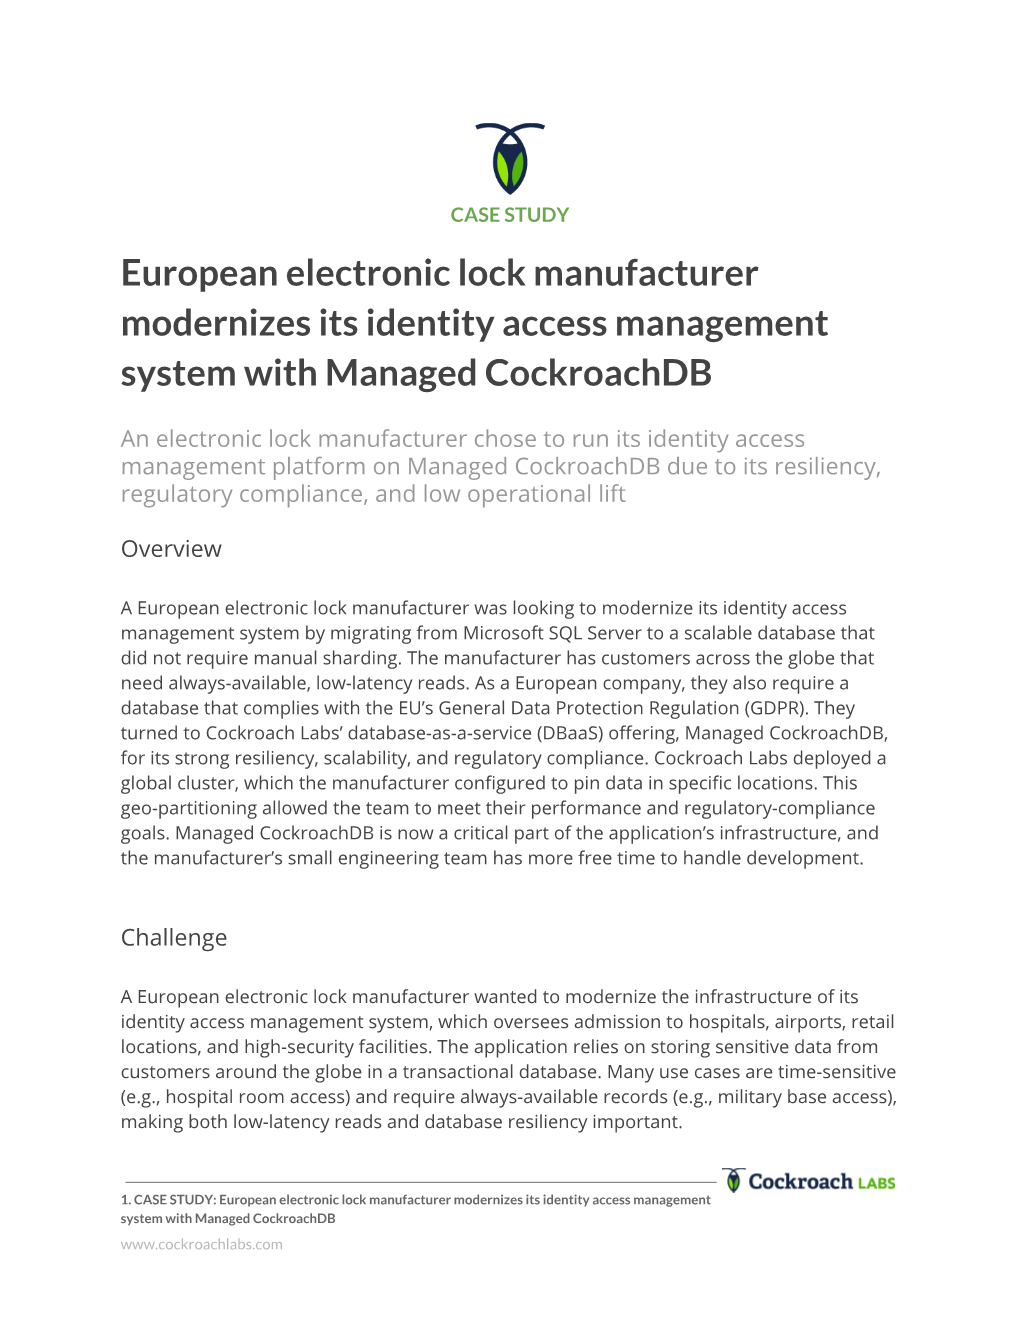 European Electronic Lock Manufacturer Modernizes Its Identity Access Management System with Managed Cockroachdb